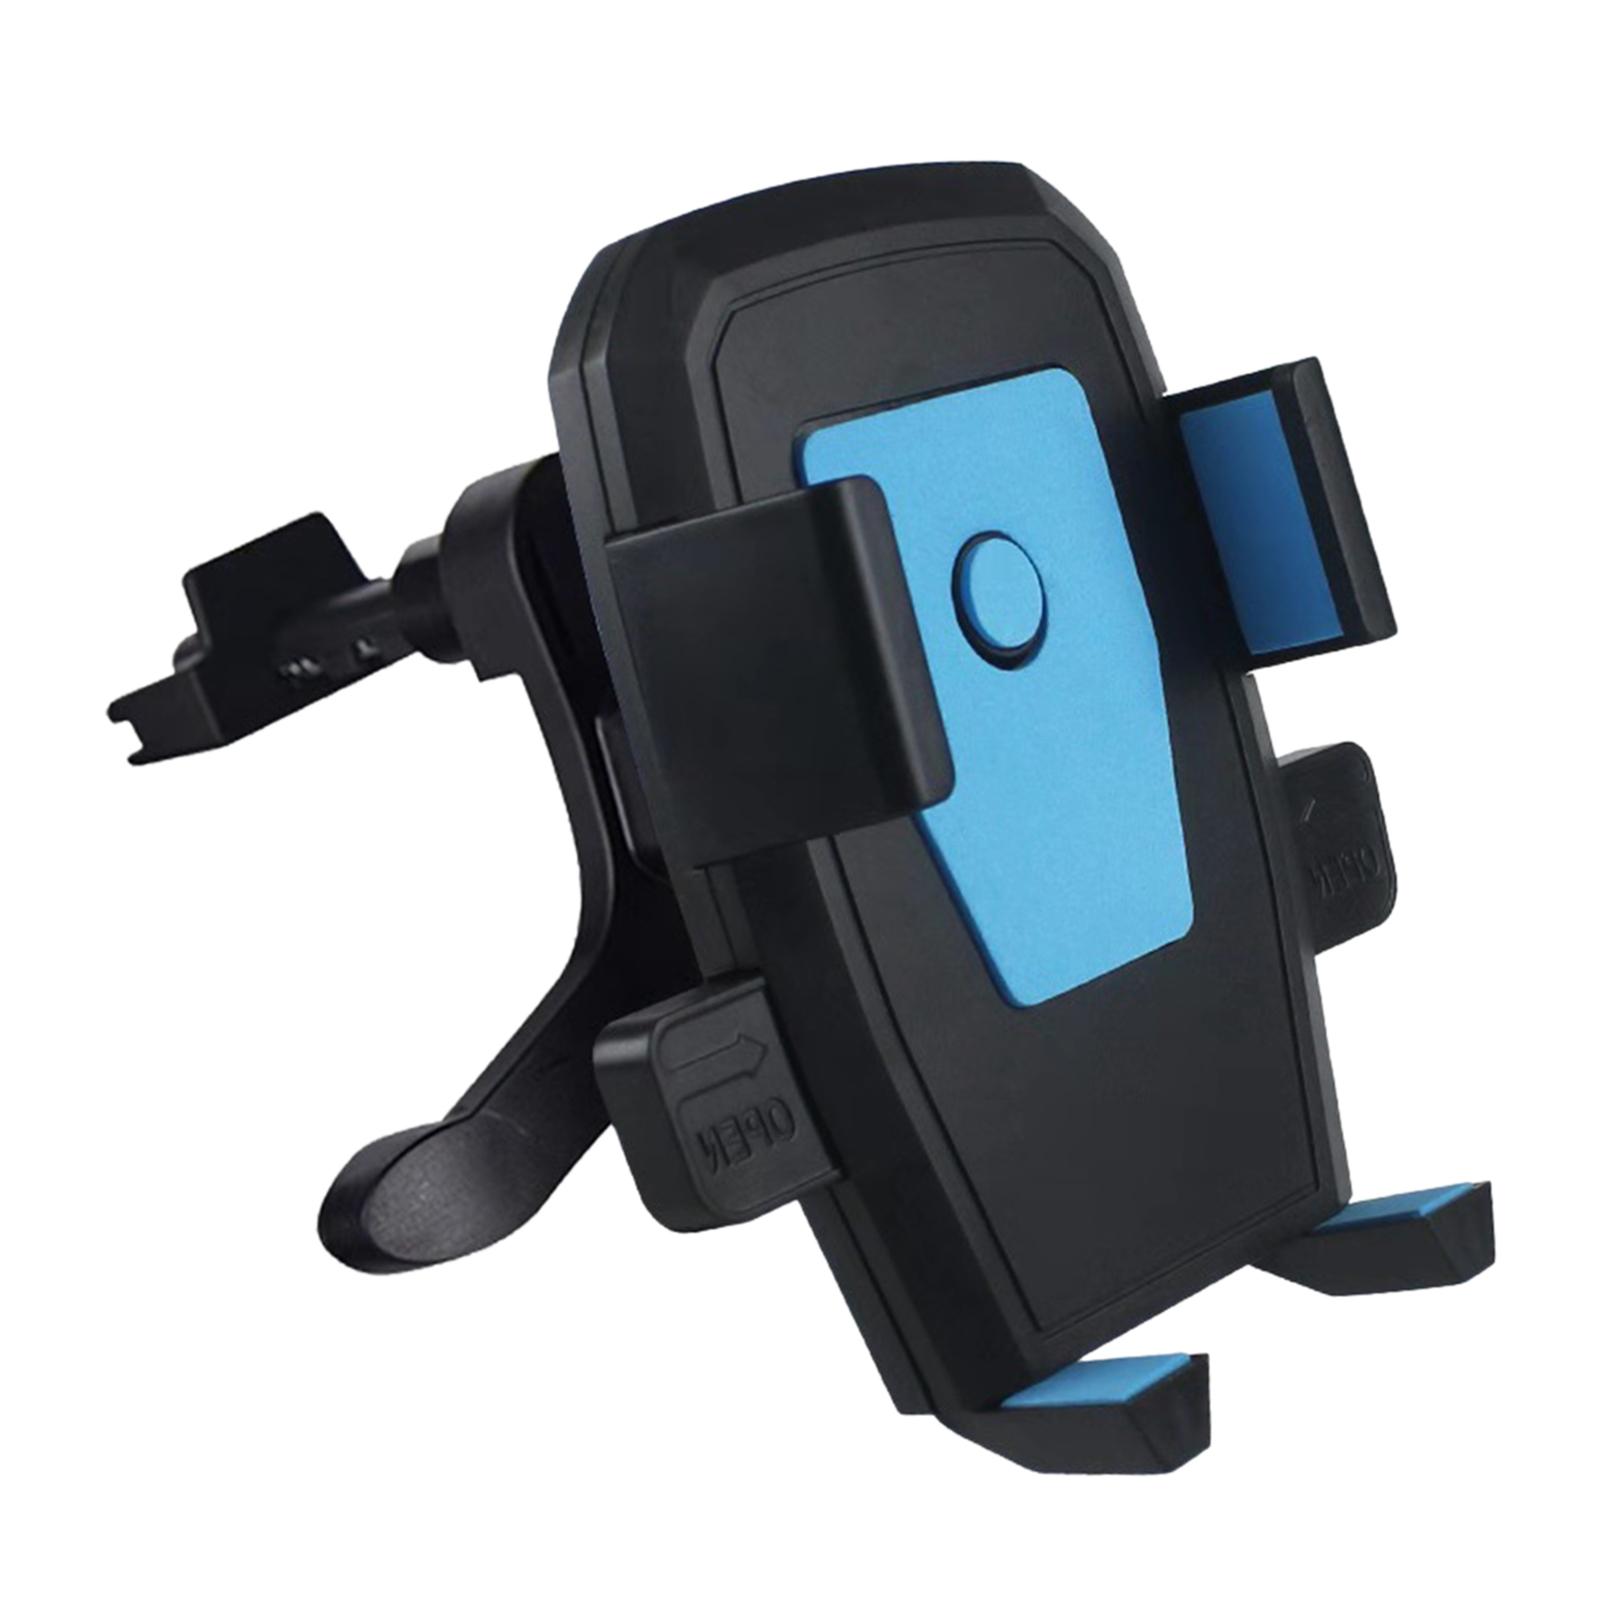 Vent Phone Holder for Car Durable Multiple Viewing Angle Adjustable Blue